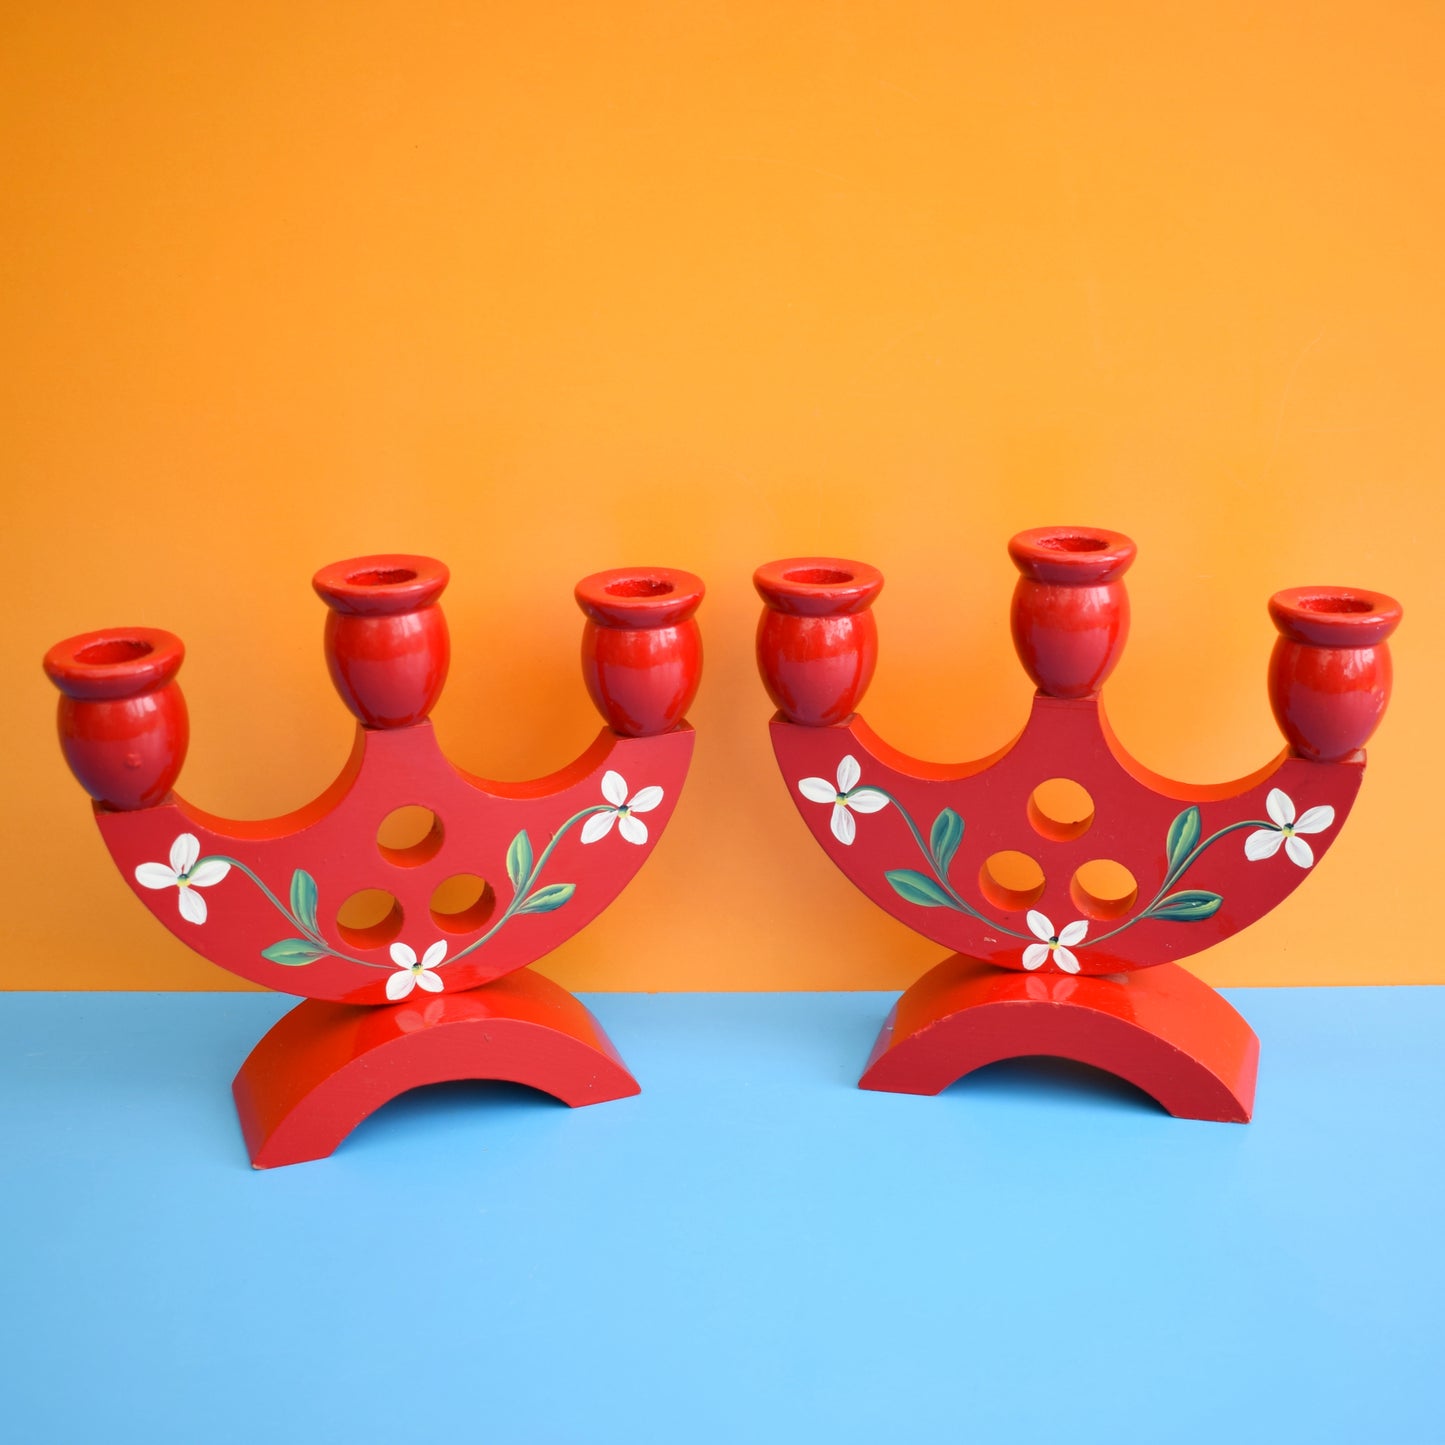 Vintage 1970s Swedish Wooden Candle Holders - Red